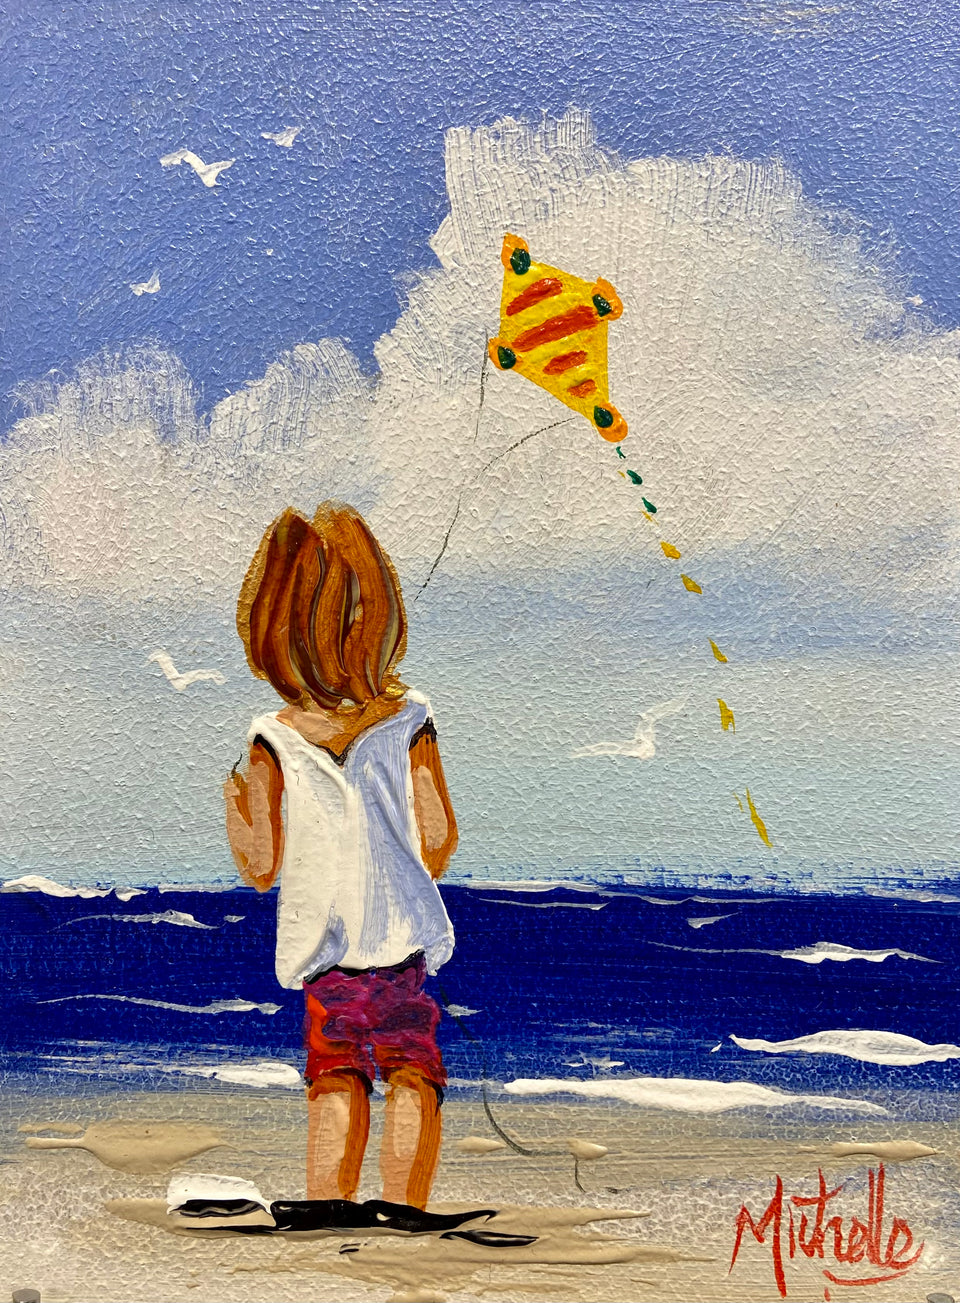 Young Girl With Kite